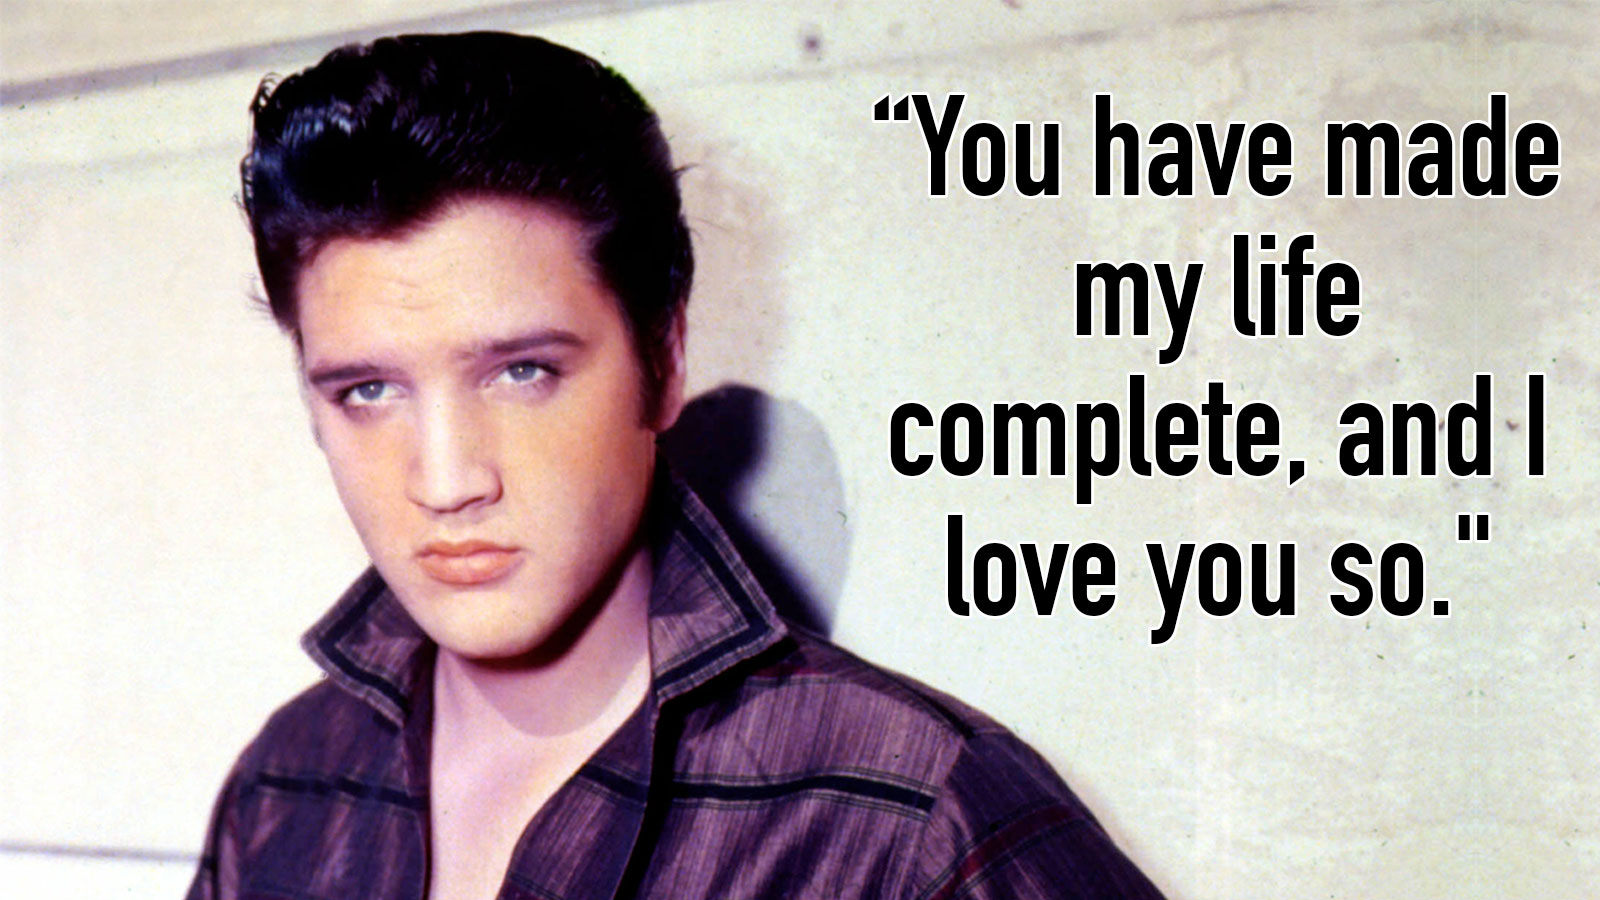 Can You Guess the Elvis Presley Song This Lyric Is From? Quiz 51